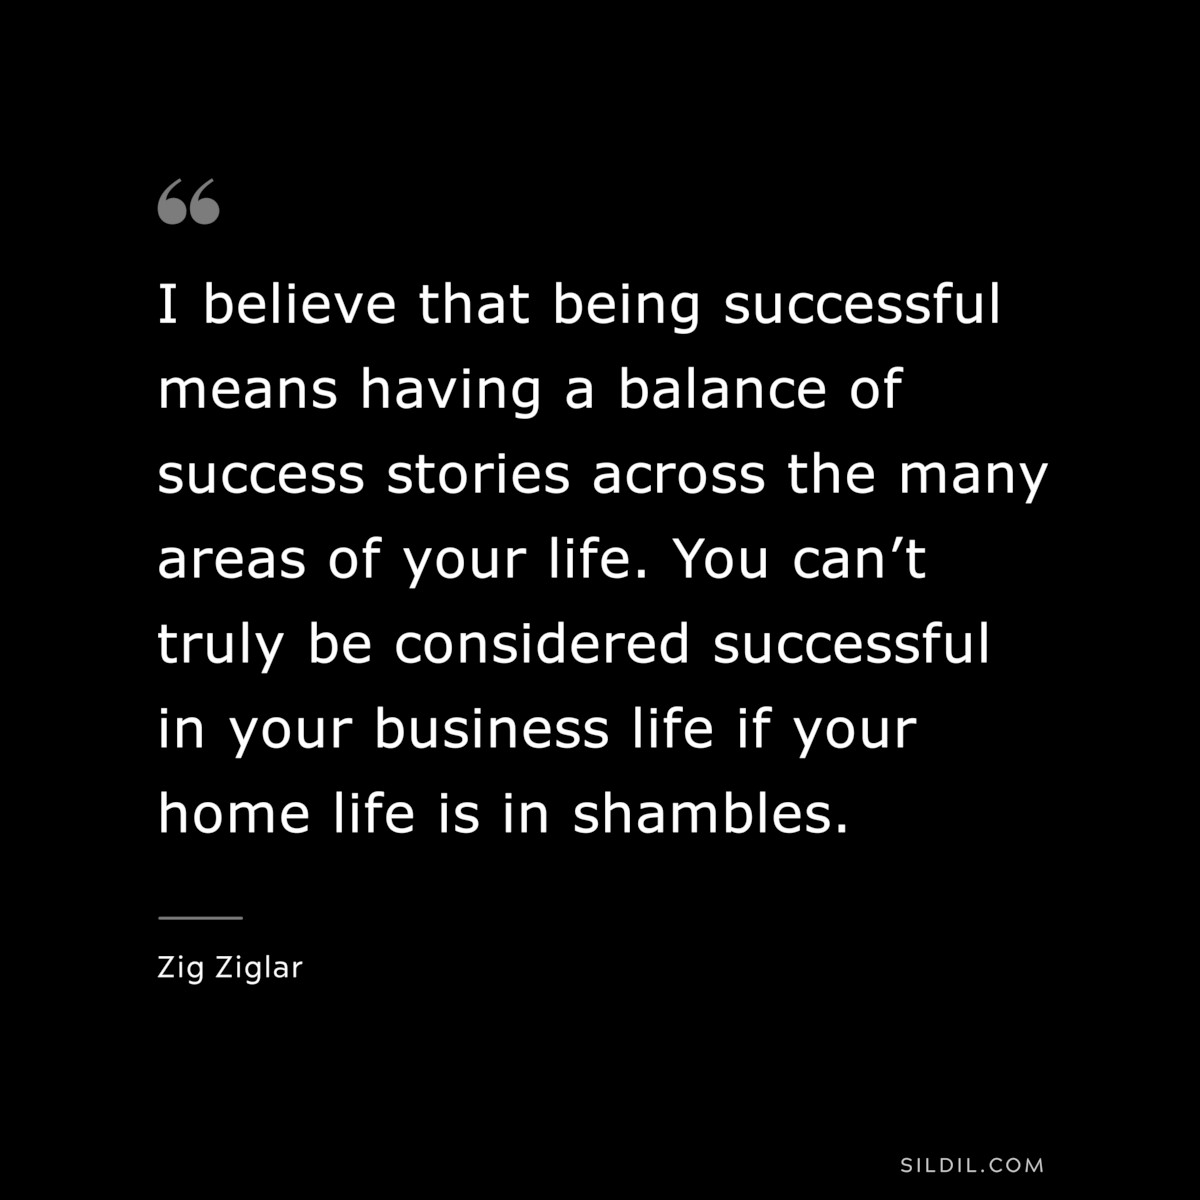 I believe that being successful means having a balance of success stories across the many areas of your life. You can’t truly be considered successful in your business life if your home life is in shambles. ― Zig Ziglar